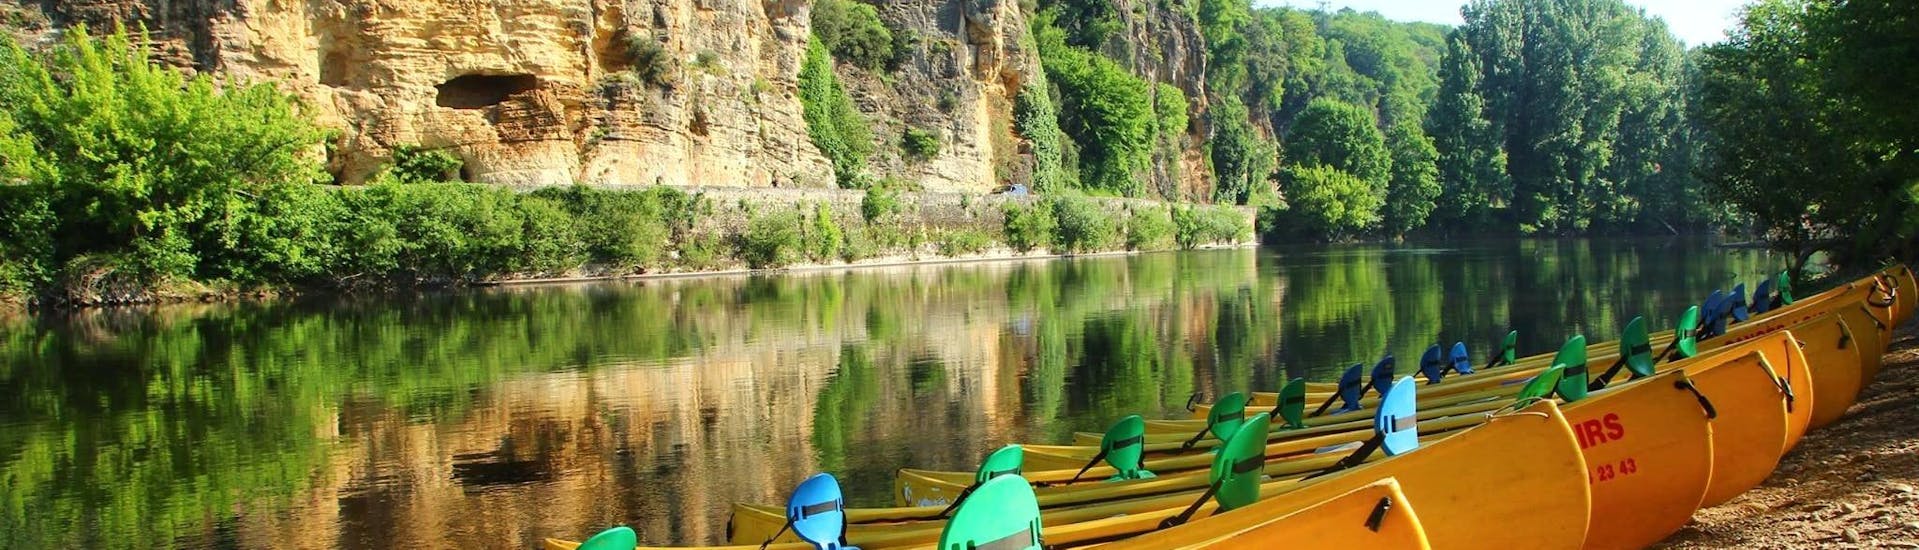 Empty canoes from Canoës Loisirs await holidaymakers on the banks of the Dordogne in the early morning for a canoe trip along the river.